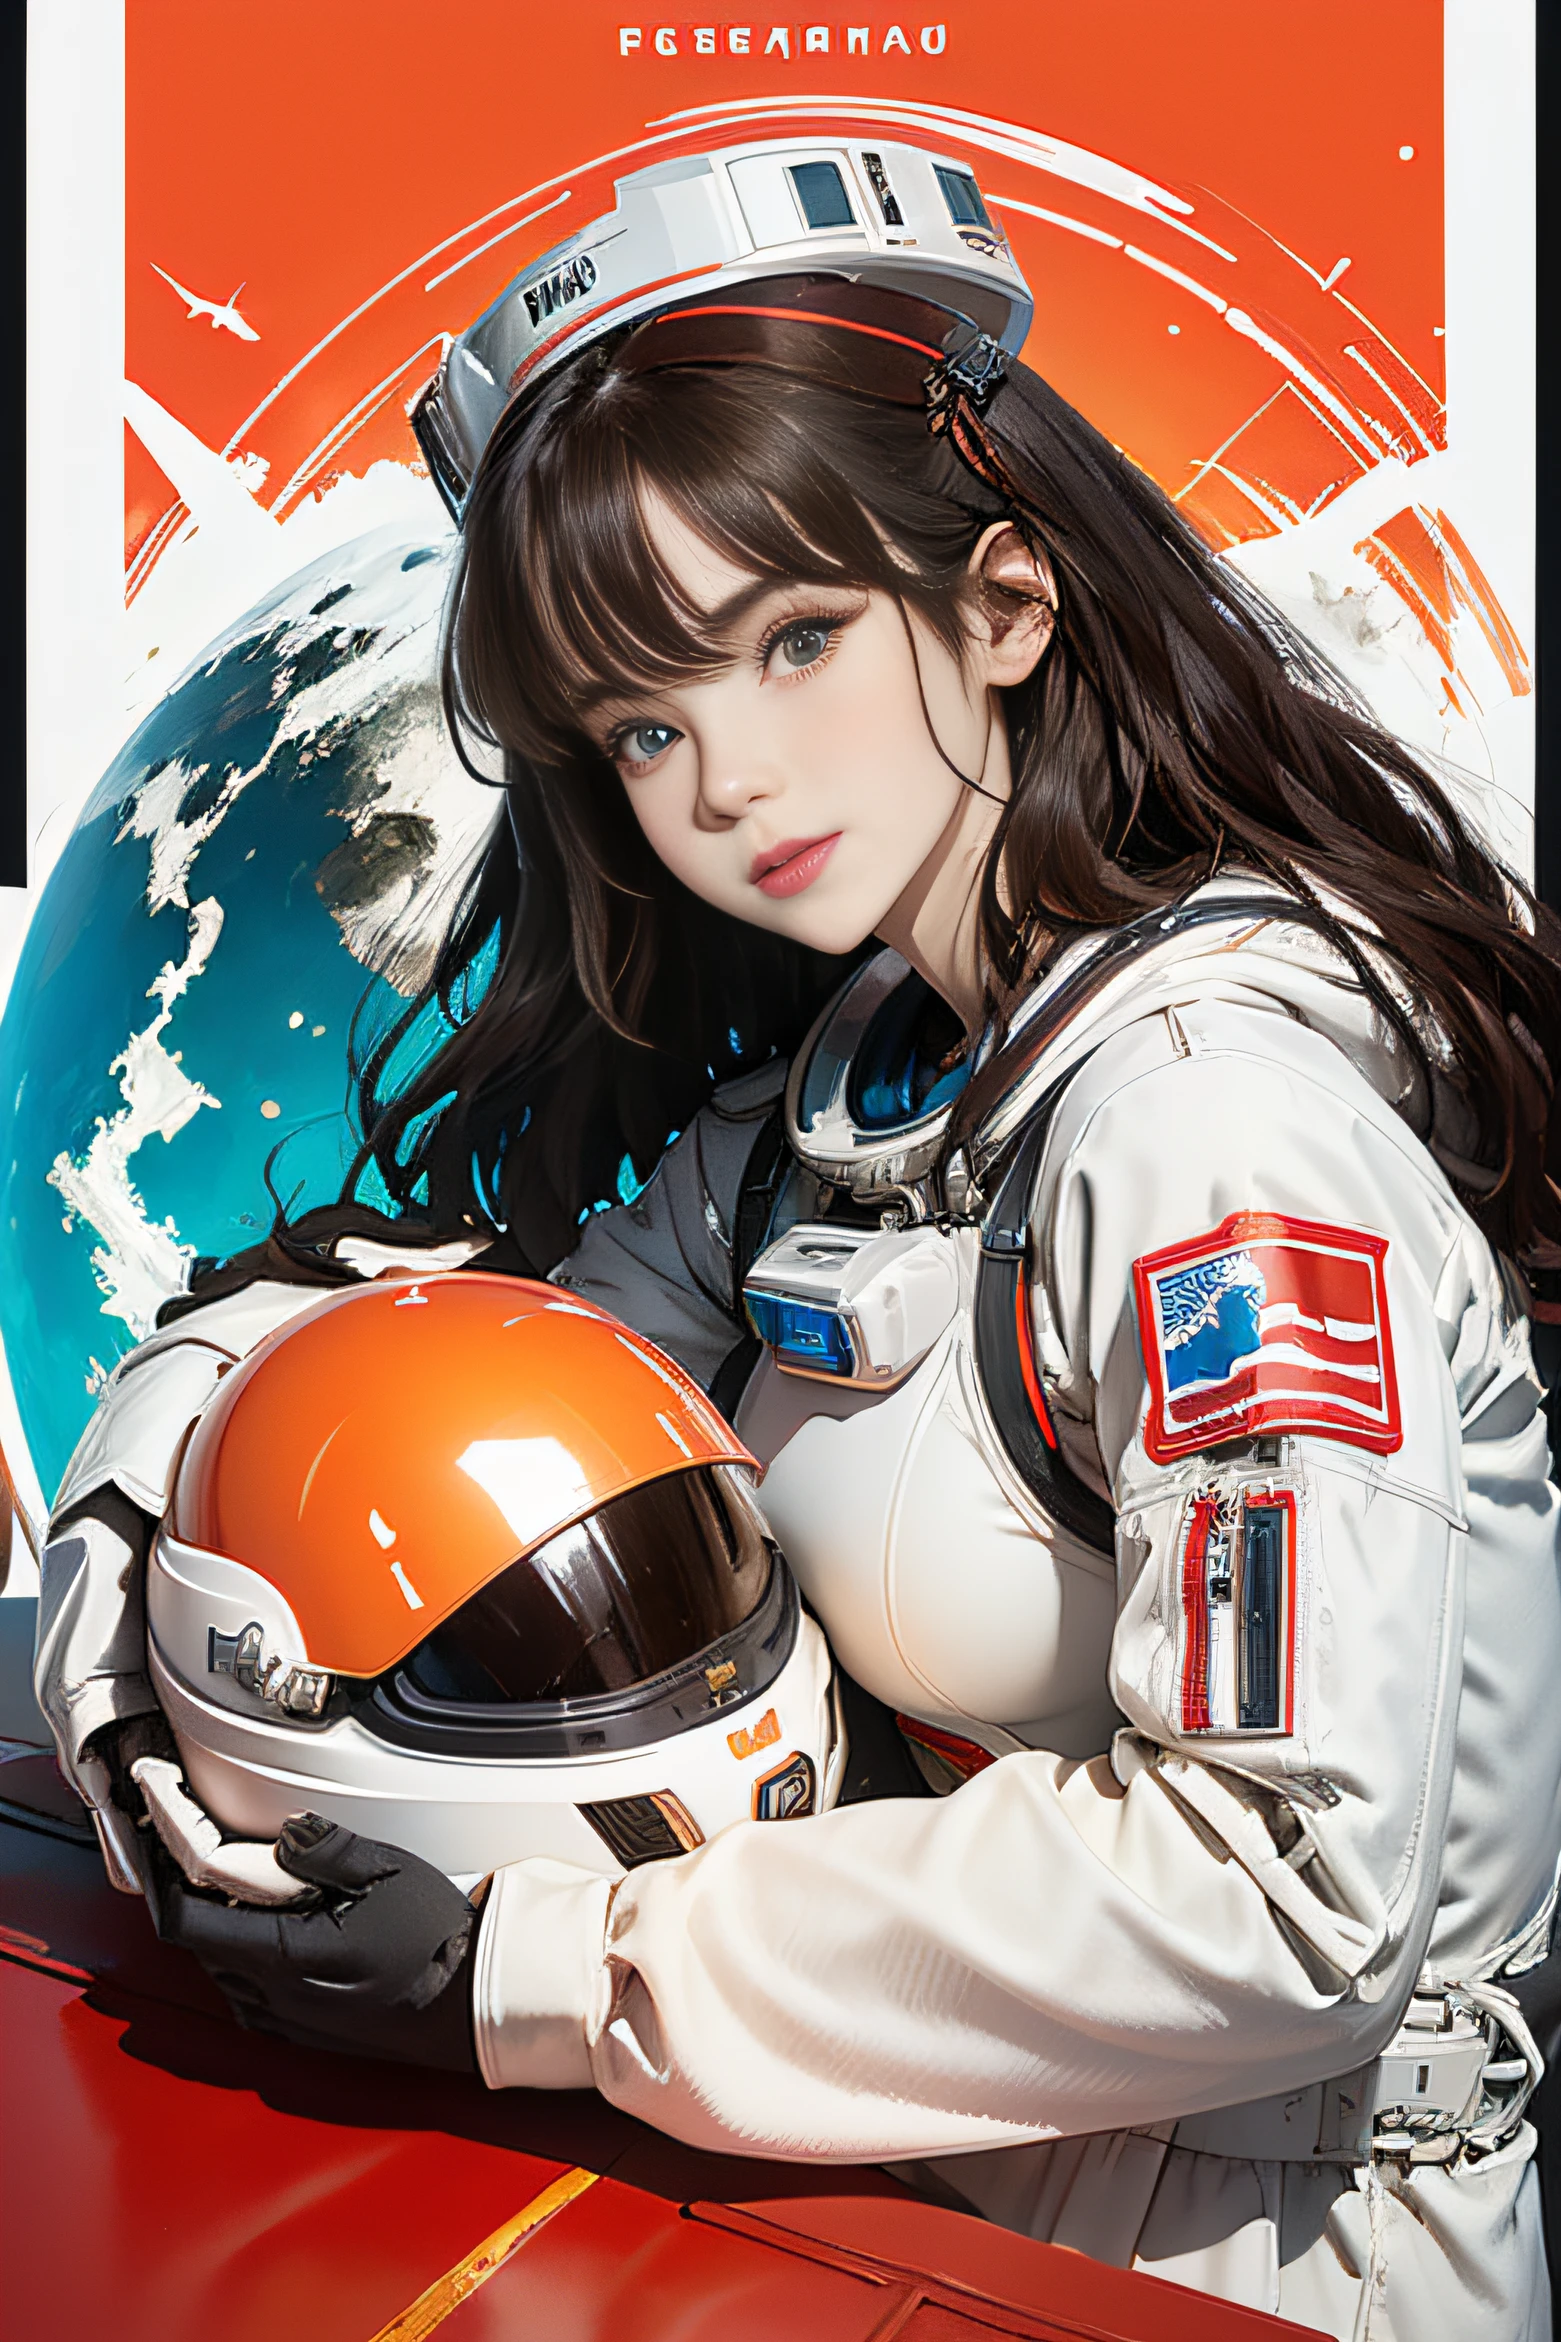 1Girl,flat_pectorals,Cute,Beautiful detailed eyes, shiny hair,You can see it through the hair.,Hair between eyes, CCCPposter, sovietposter,Red monochrome,USSR Poster, soviet,communism, black_heads,red_eyes,Vampire,teenage,Middle breast,space suit:orange_Clothing_Body:jumpsuit),white_glove, white_space shoes, white_helmet, CCCP red letter on the top of the helmet, zero gravity, sidelit, reflection, A person in a spacesuit is located in the lower left corner of the frame, The right hand is outstretched, The right hand gently touches the Salyut space station), Space station in the upper right corner of the screen, Light reflected from the sun, Silver metal,red flag, brilliance,Soviet style, diffuse reflection, Metallic texture, The vista is the blue earth,in mecha style,Sea of Stars,Treble, majestueux